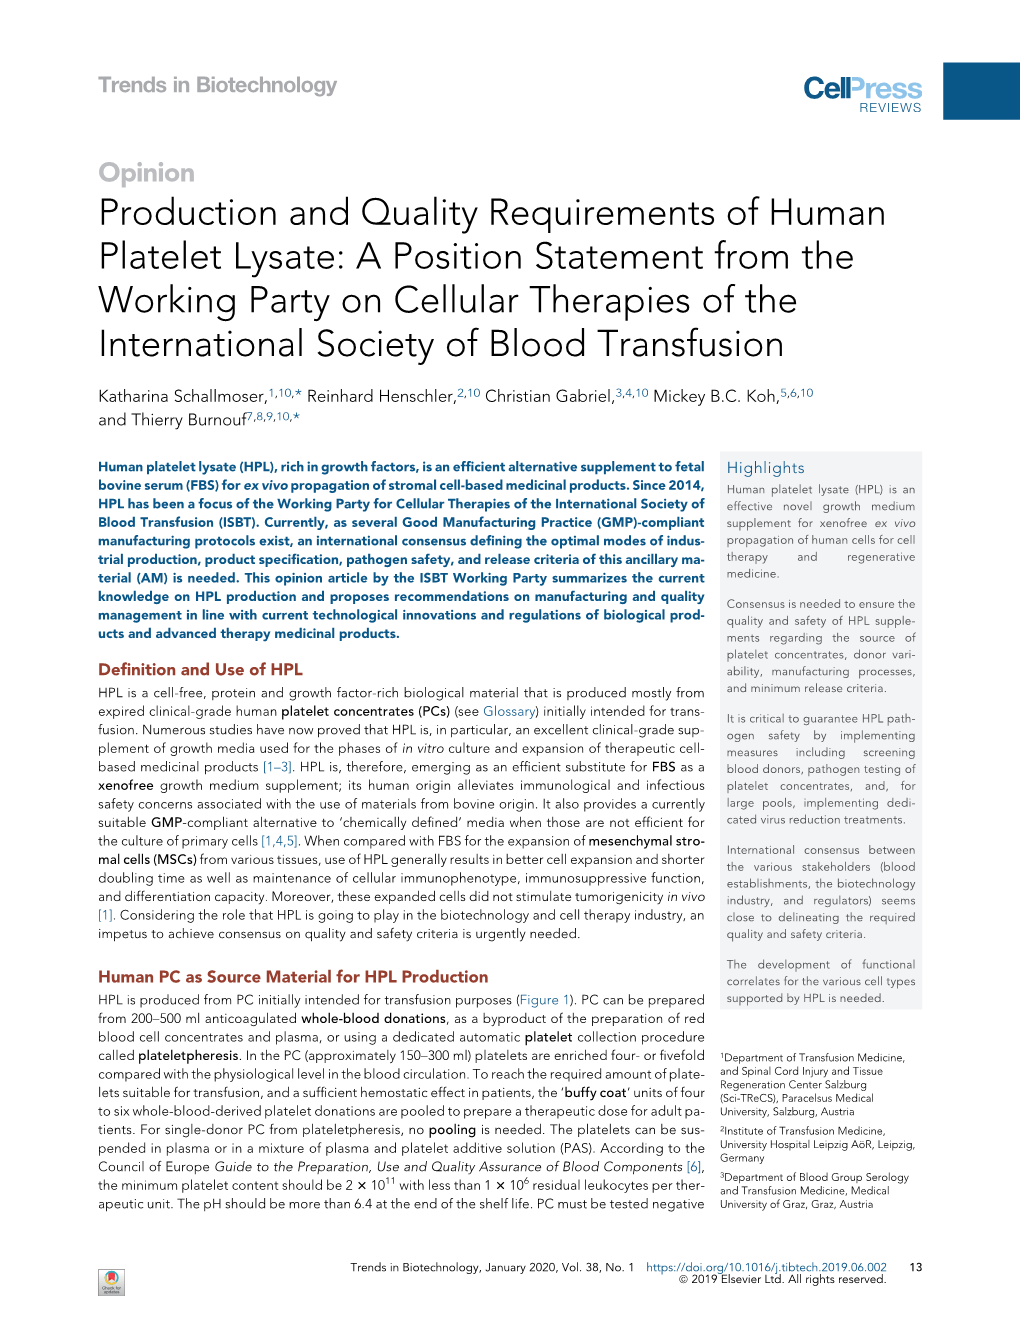 Production and Quality Requirements of Human Platelet Lysate: A